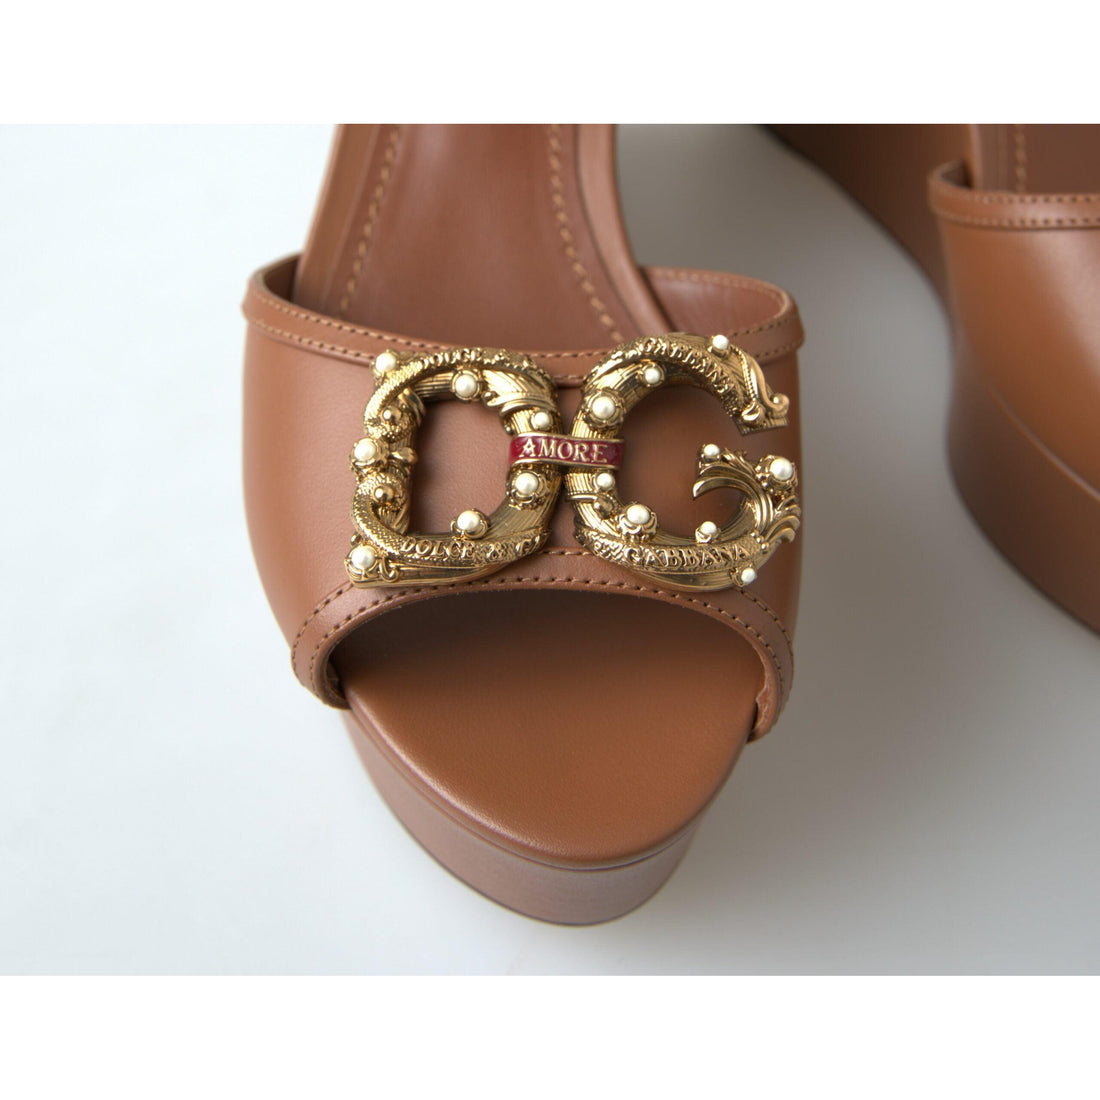 Dolce & Gabbana Chic Brown Leather Ankle Strap Wedges